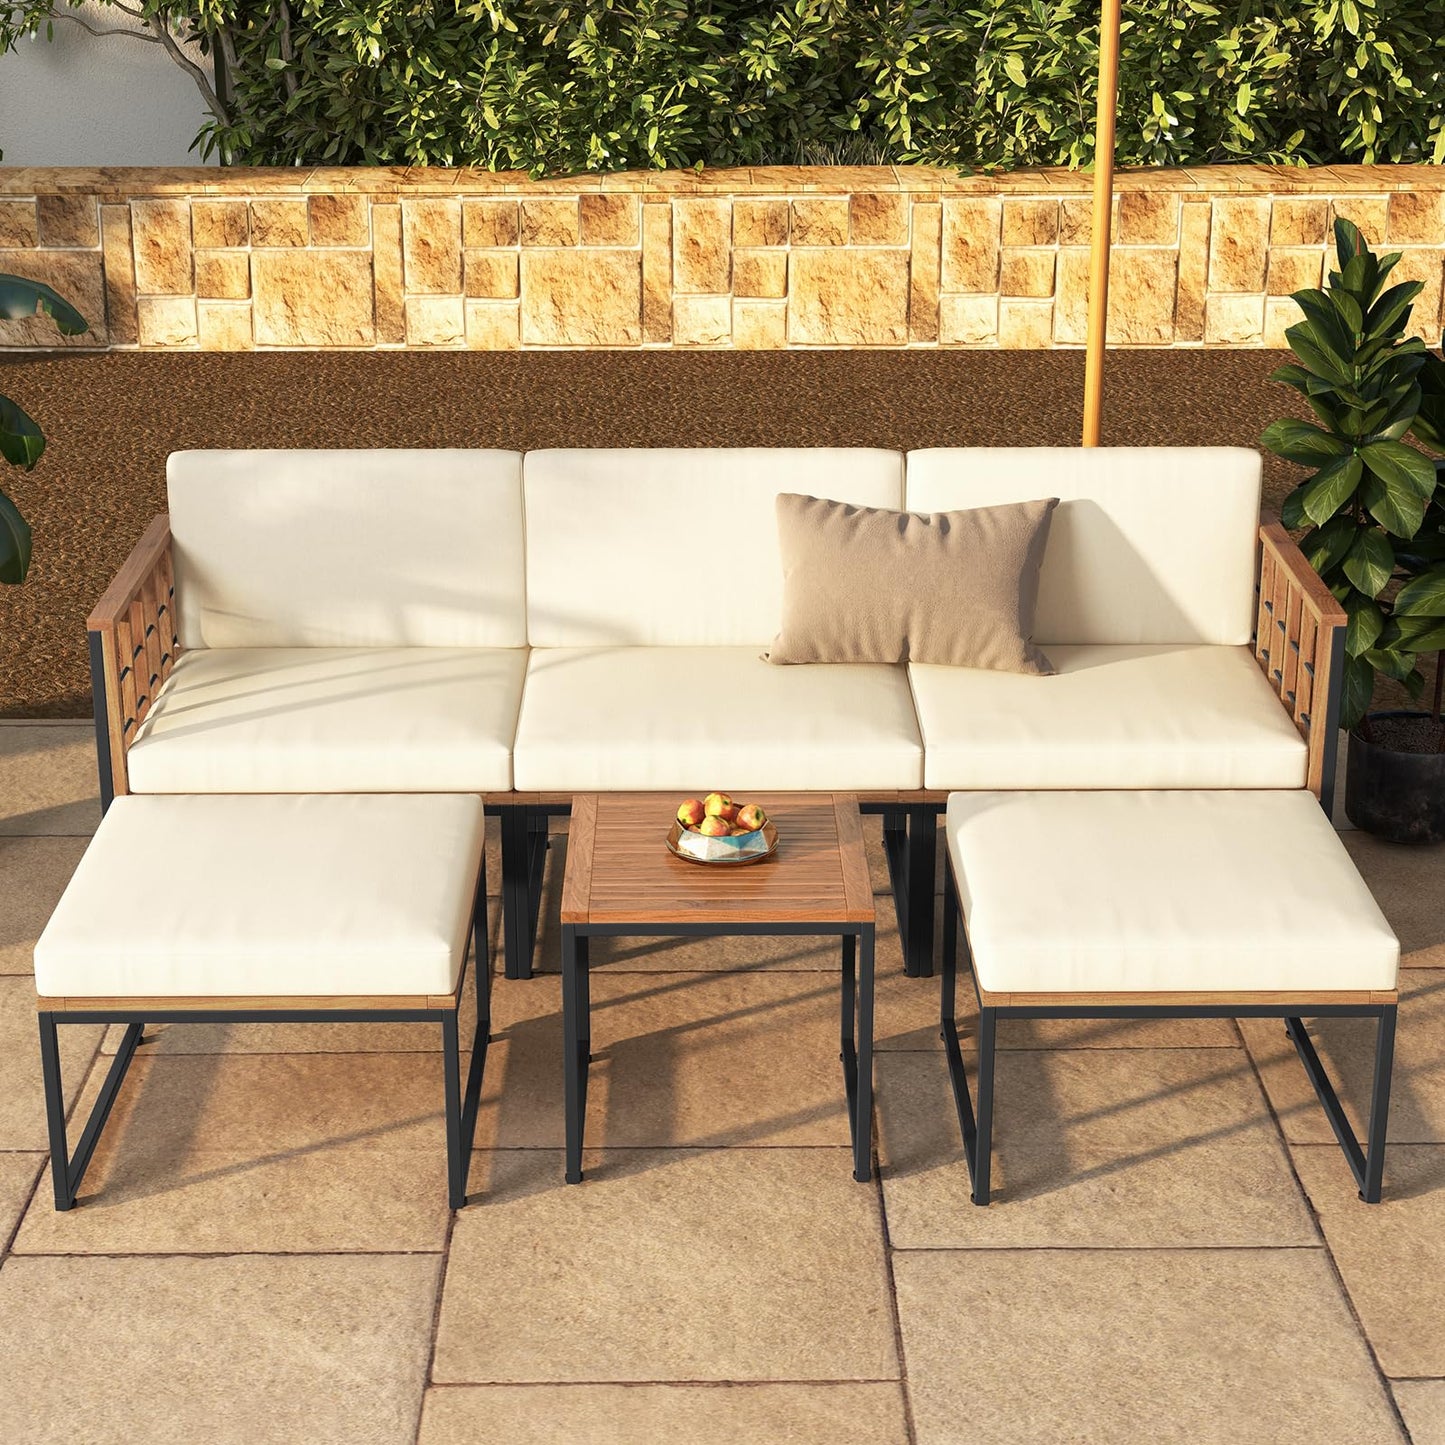 Tangkula 6 Pieces Acacia Wood Patio Furniture Set, Patiojoy Outdoor Sectional Conversation Sofa Set with Cushions, Coffee Table and Ottomans, Patio Seating Sofas for Garden, Poolside, Backyard (Beige)